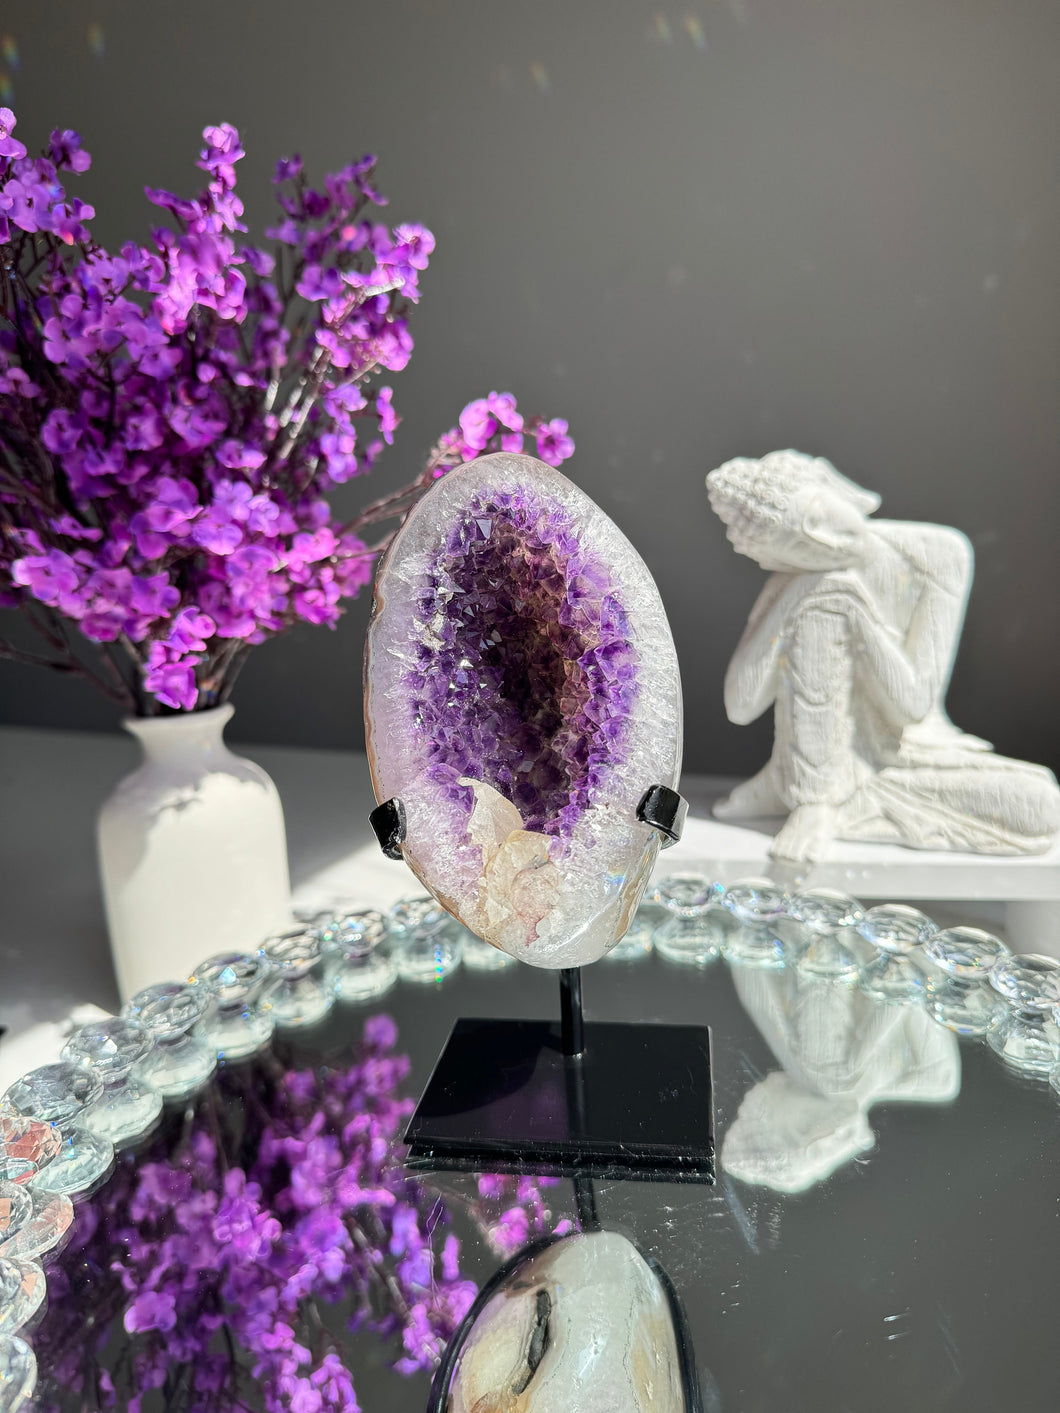 Amethyst geode with calcite Healing crystals 2765